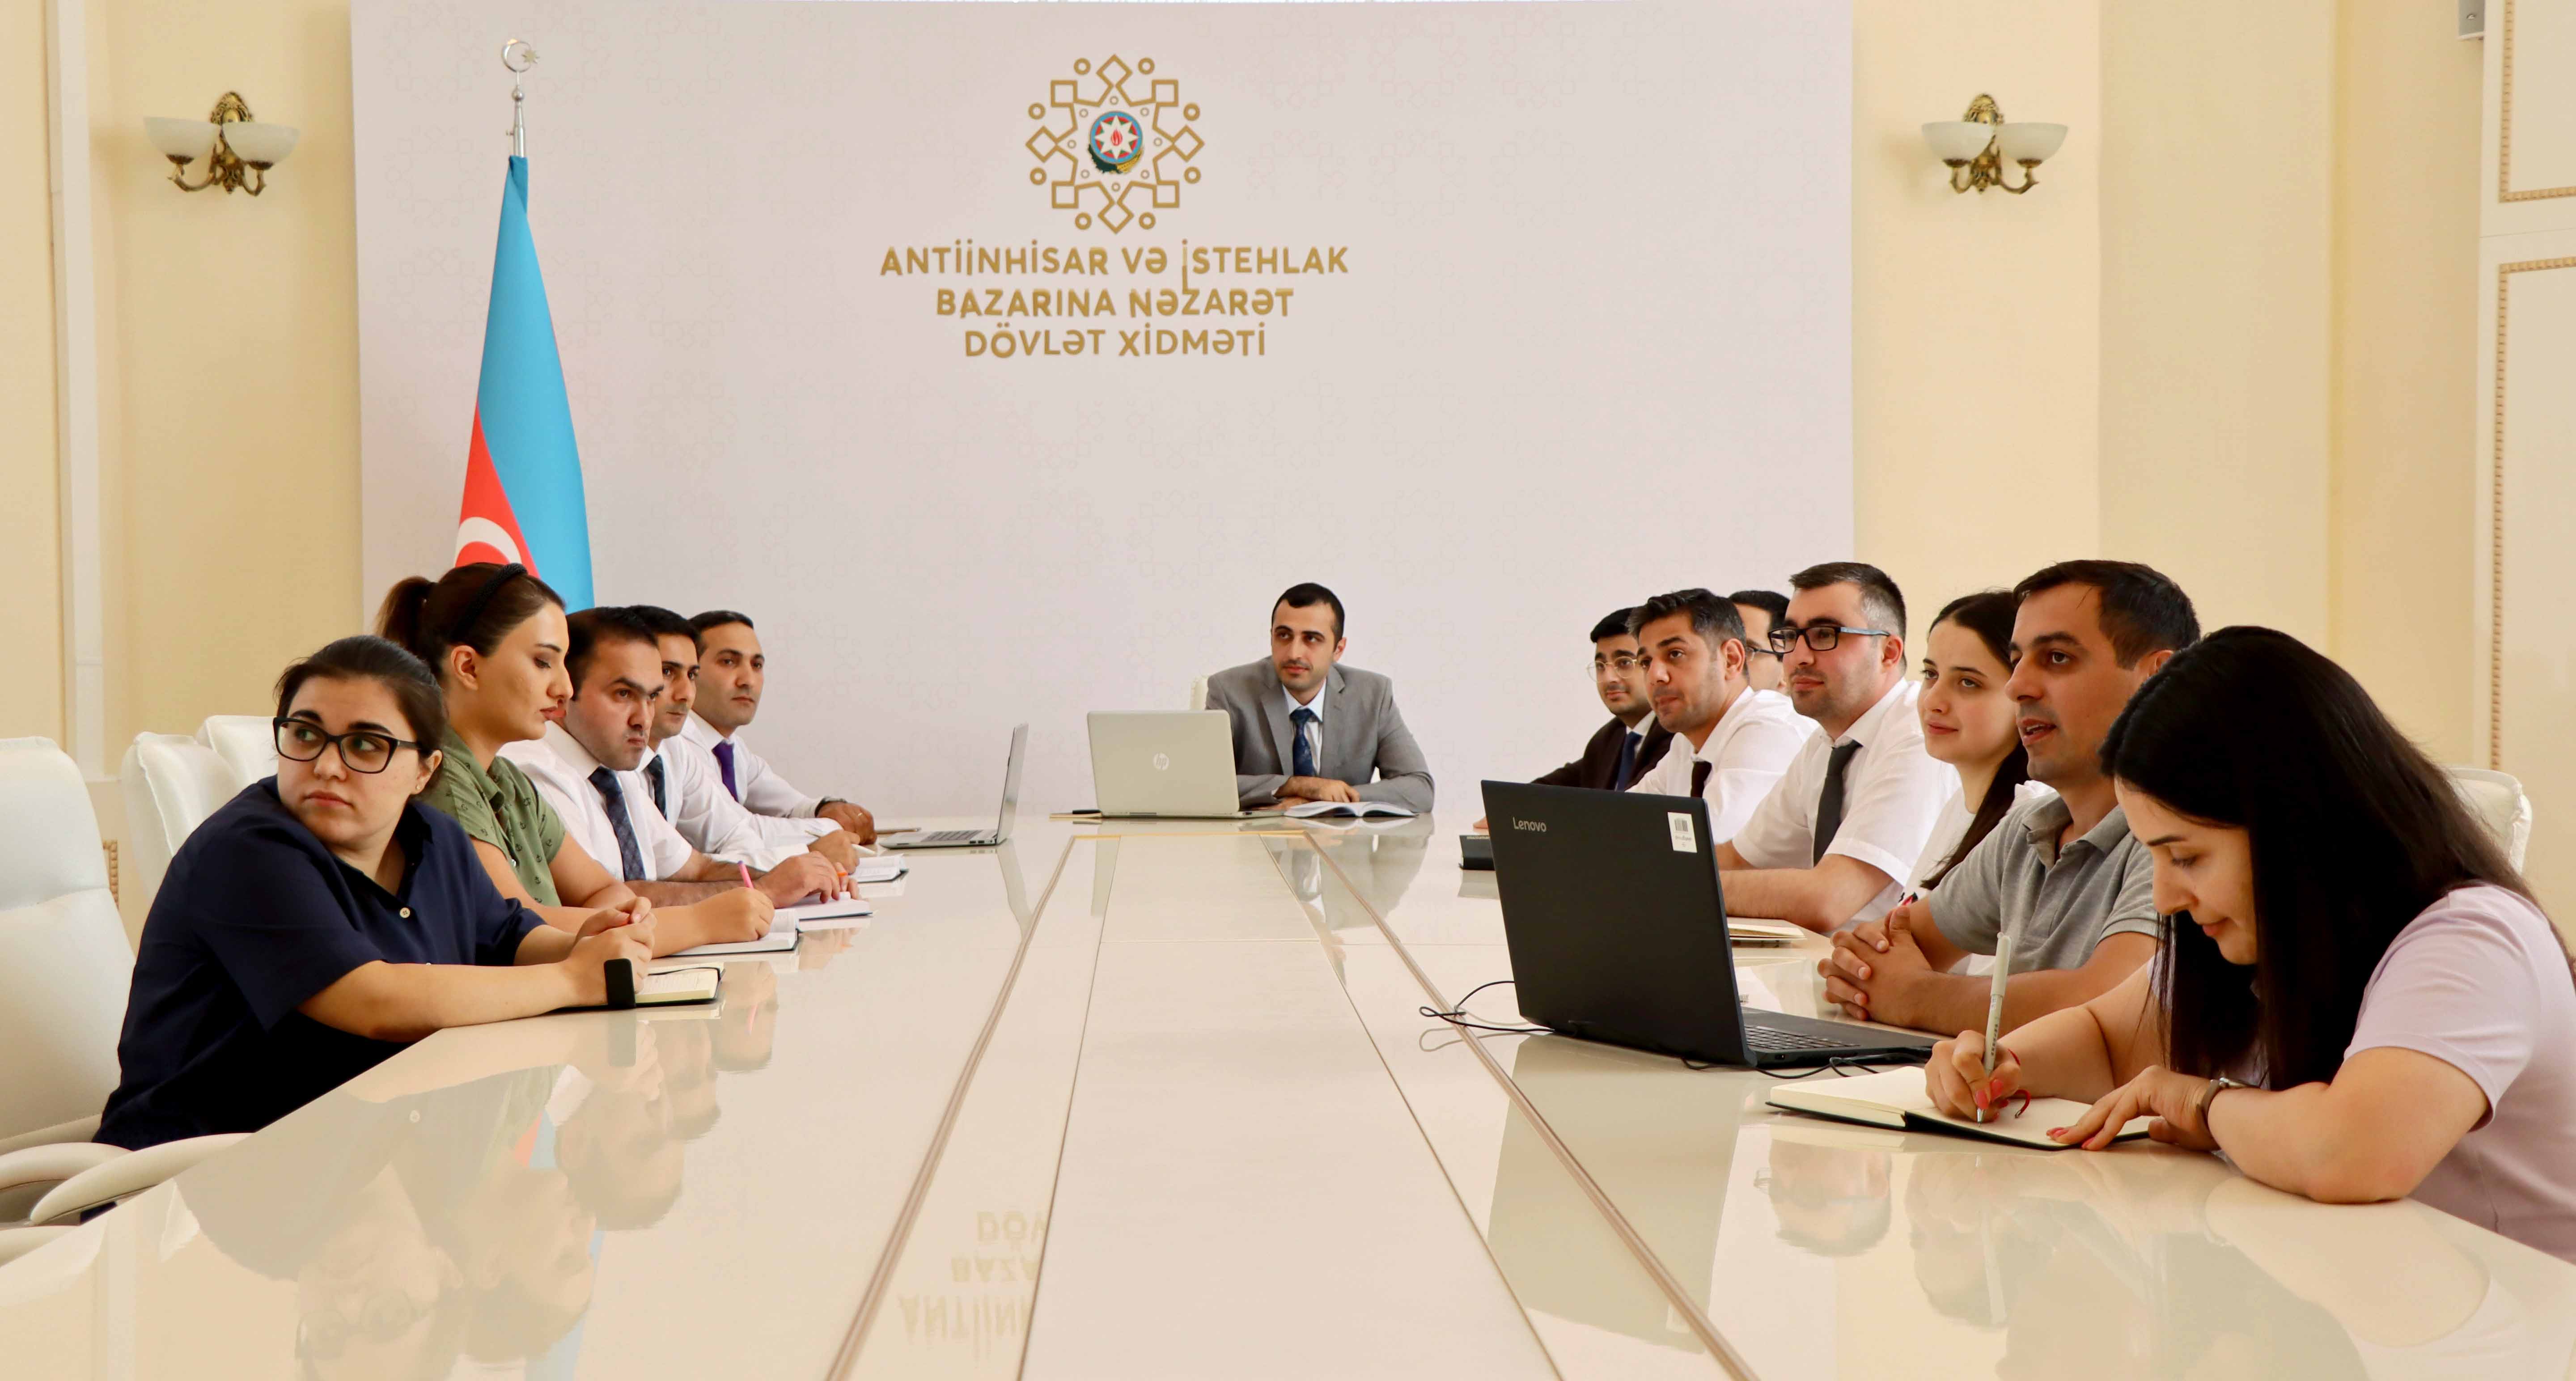 Training was held for representatives of medical institutions on the organization of state procurement